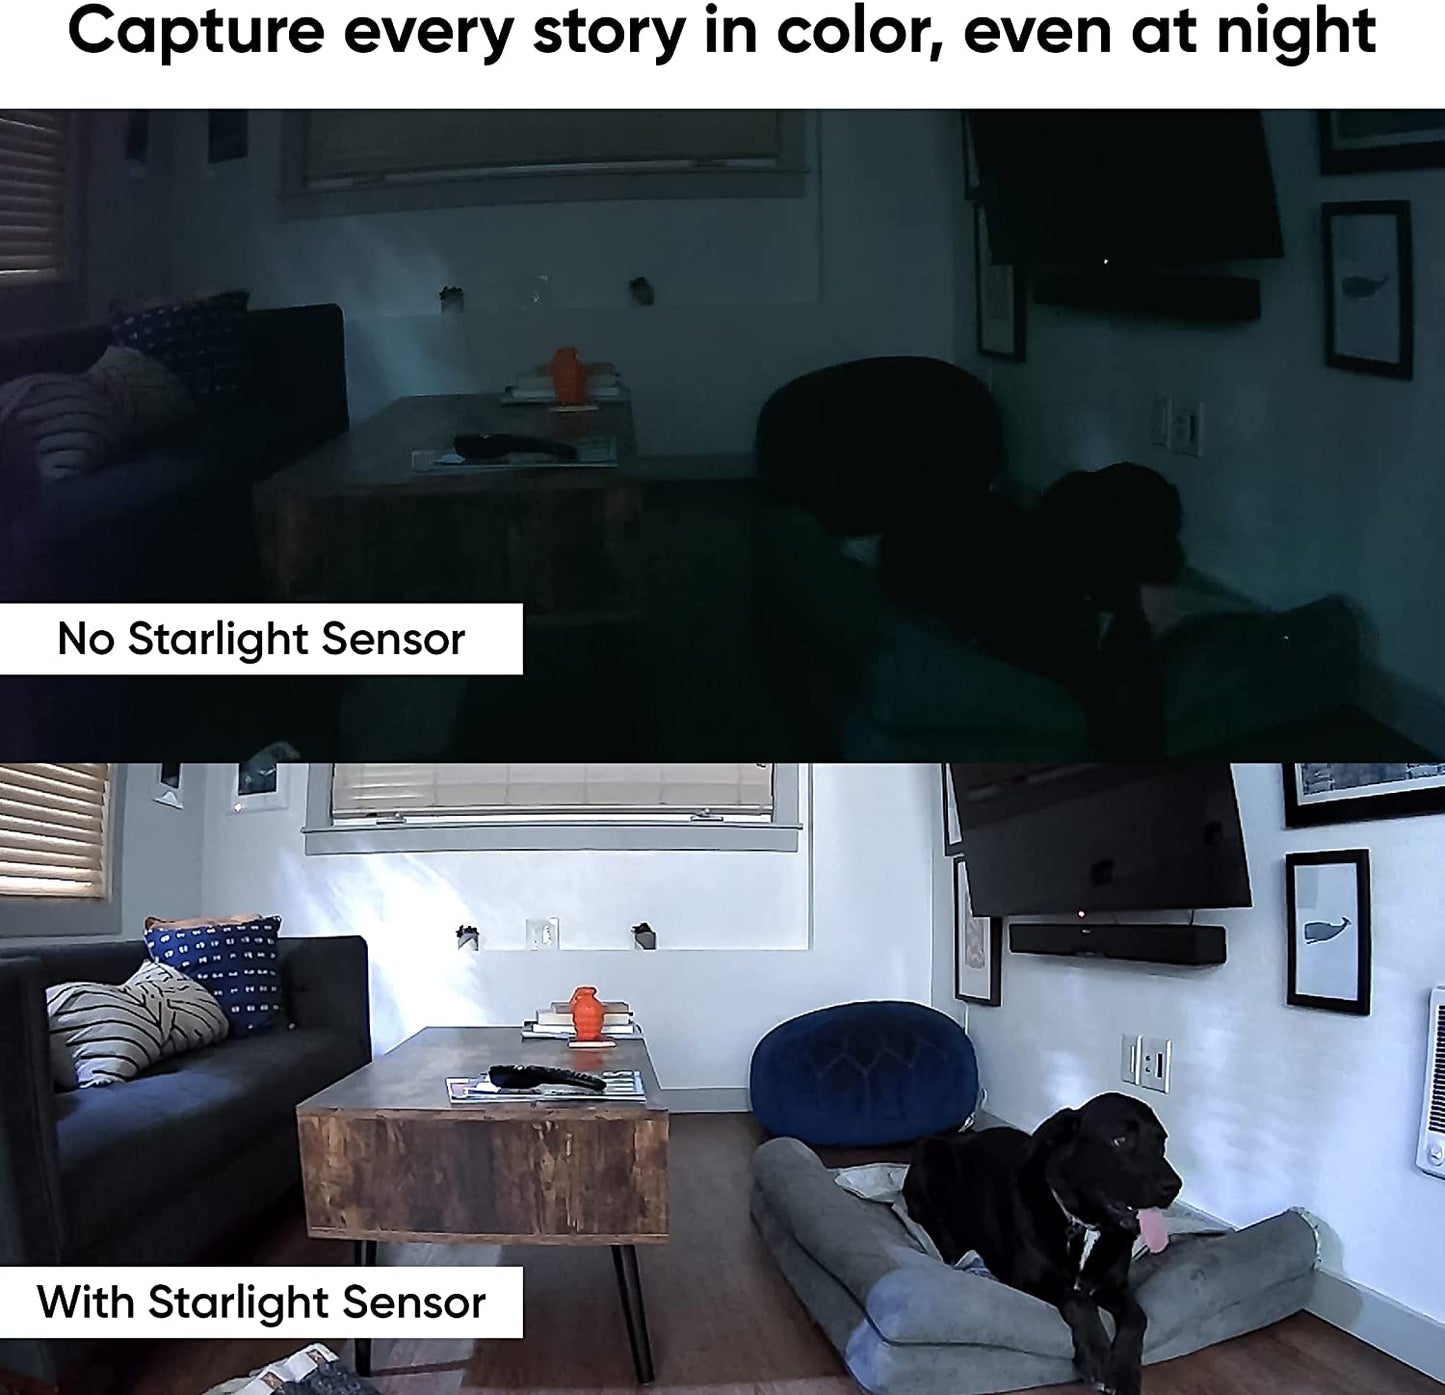 Text overlay "Capture every story in color, even at night". Comparison image with darker image in the top and color night vision on the bottom. 